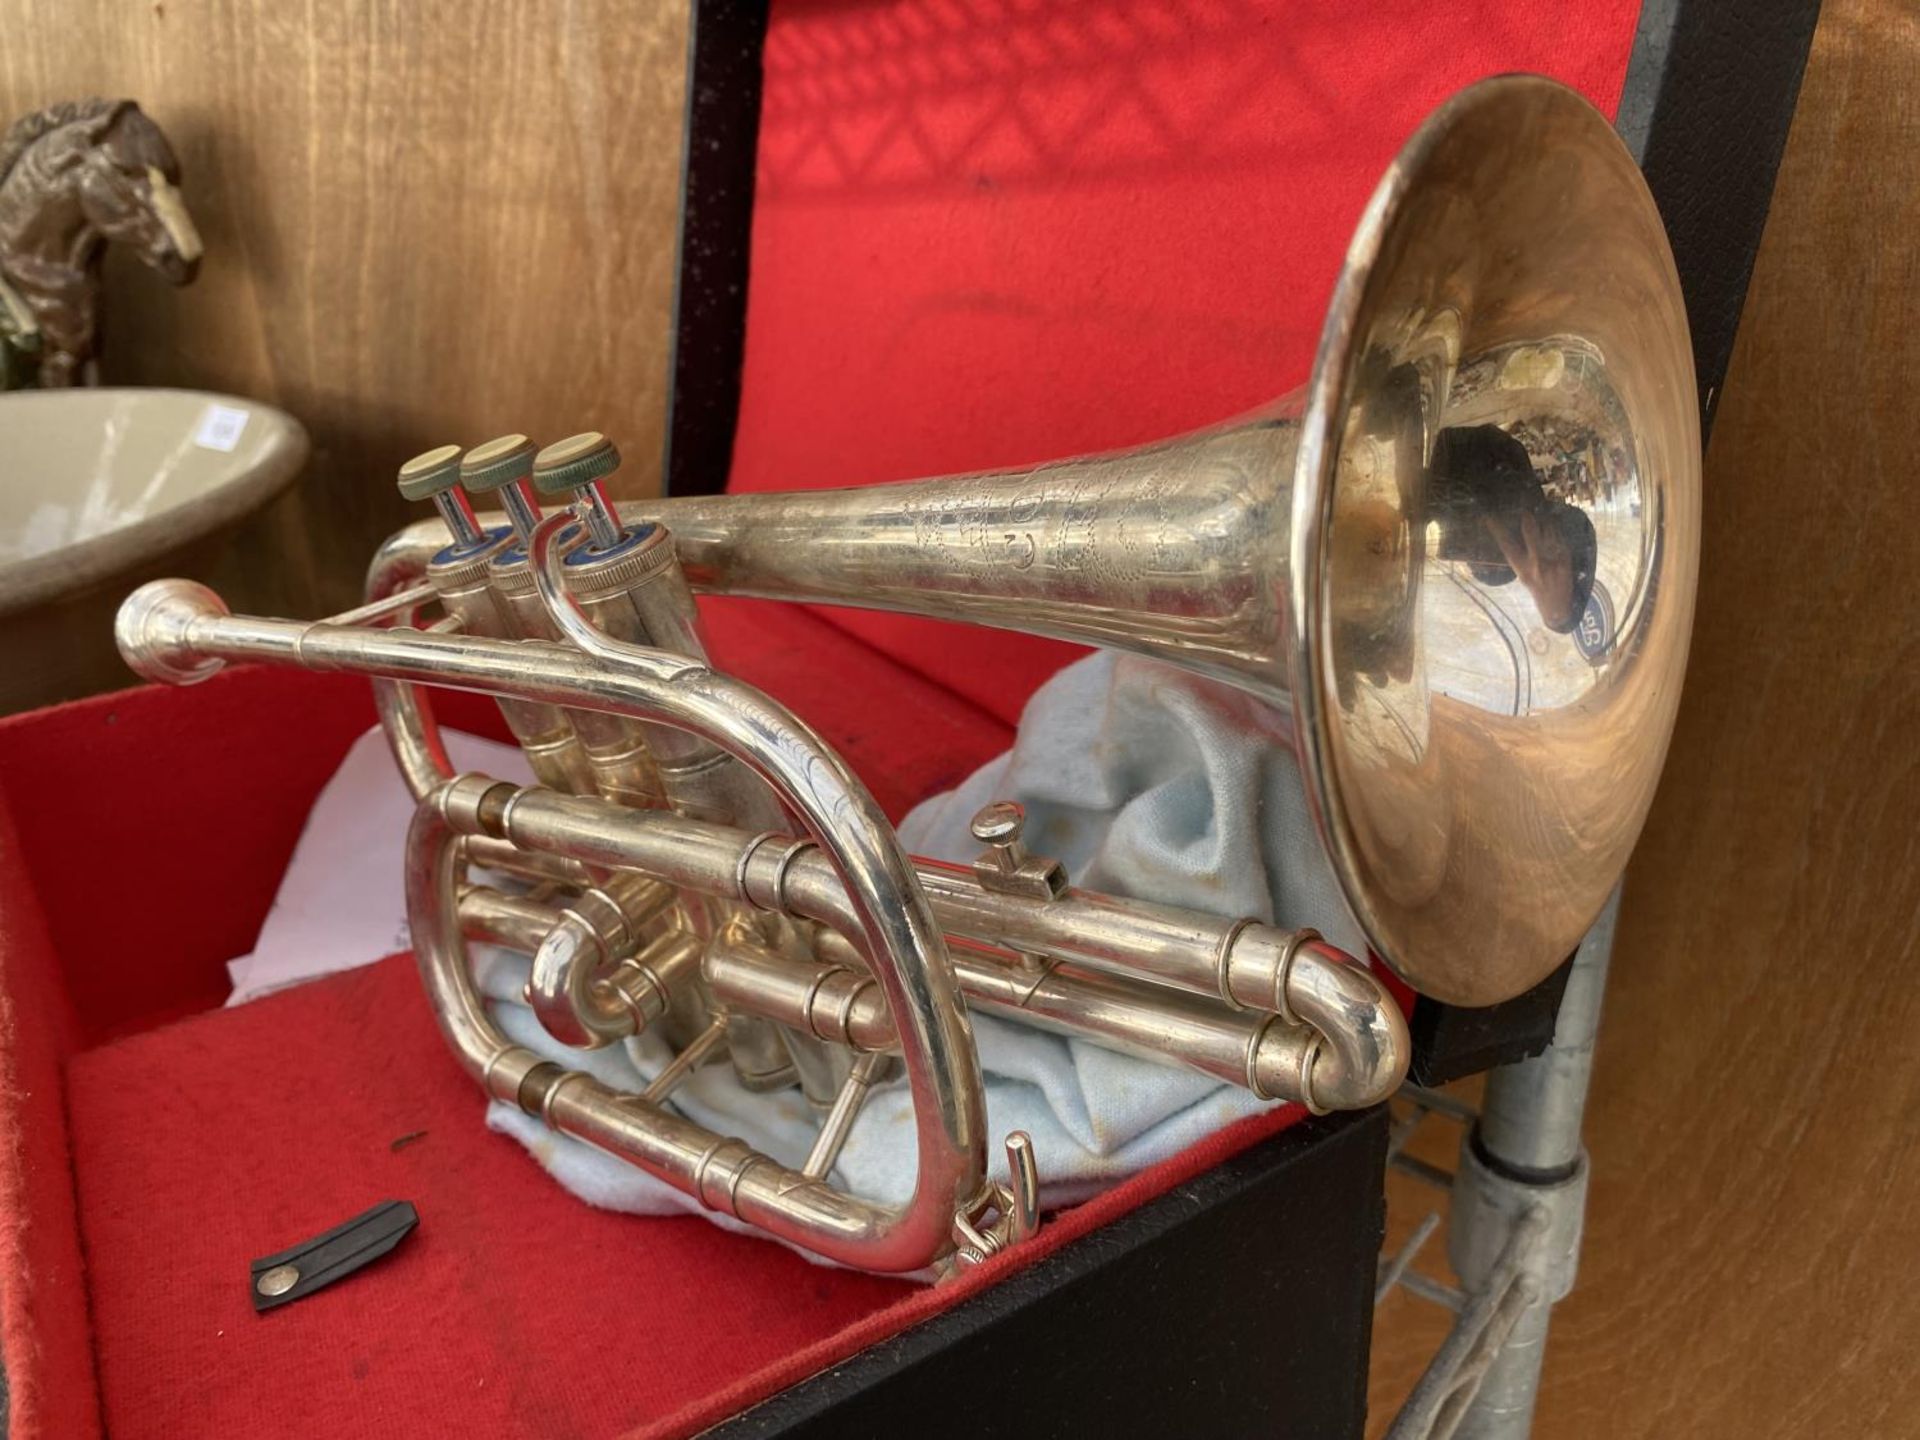 A CASED TRUMPET BEARING THE STAMP 'CORTON' - Image 2 of 3